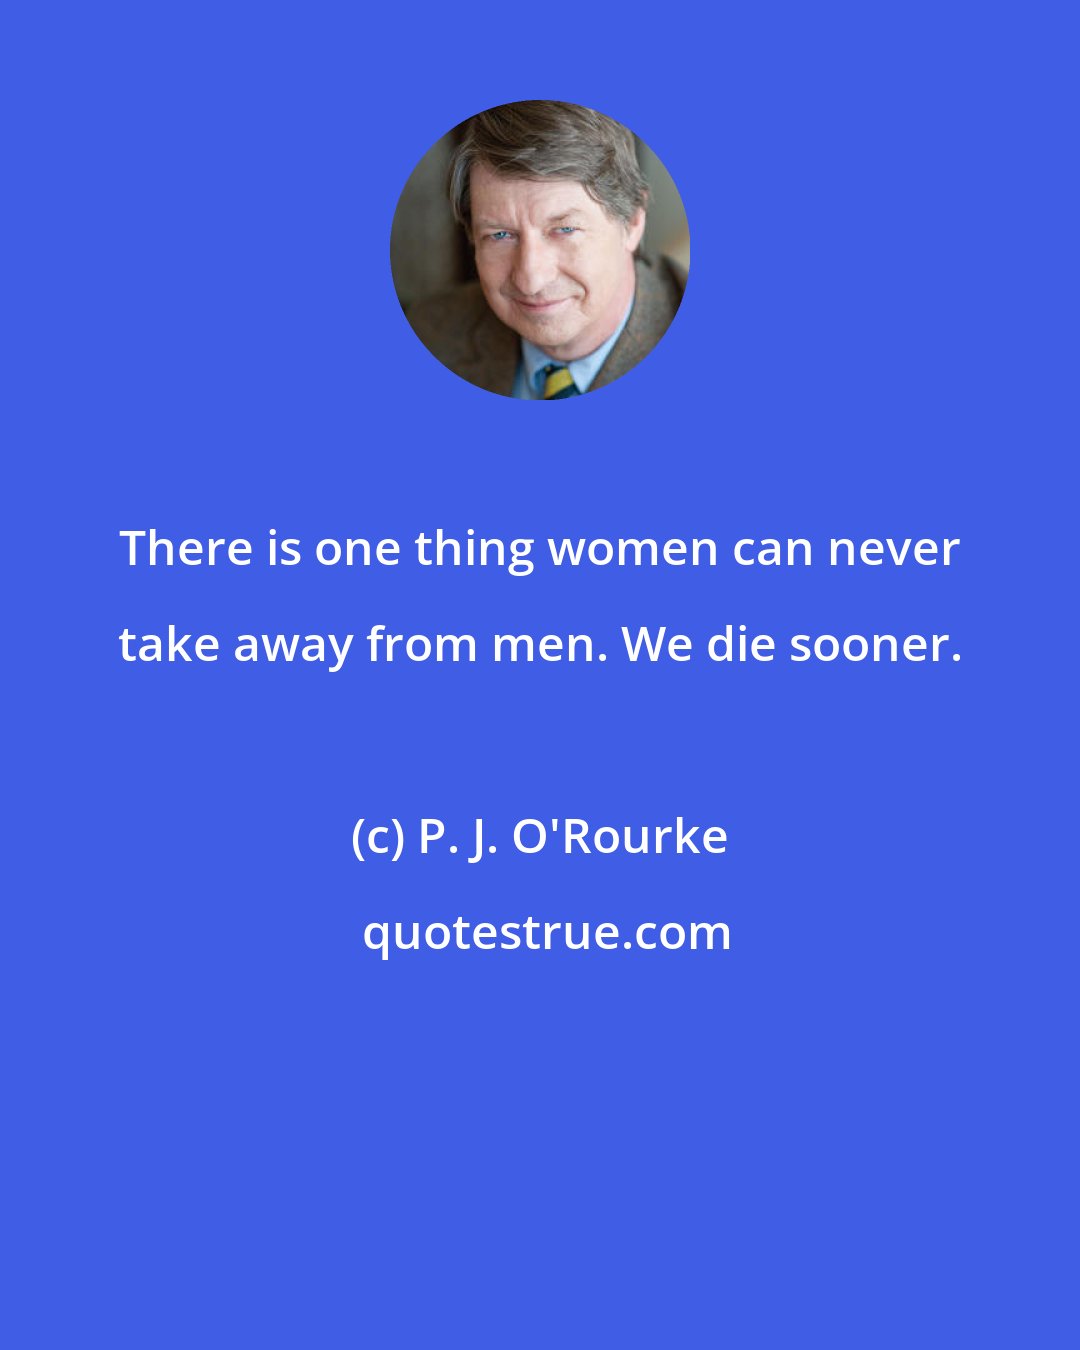 P. J. O'Rourke: There is one thing women can never take away from men. We die sooner.